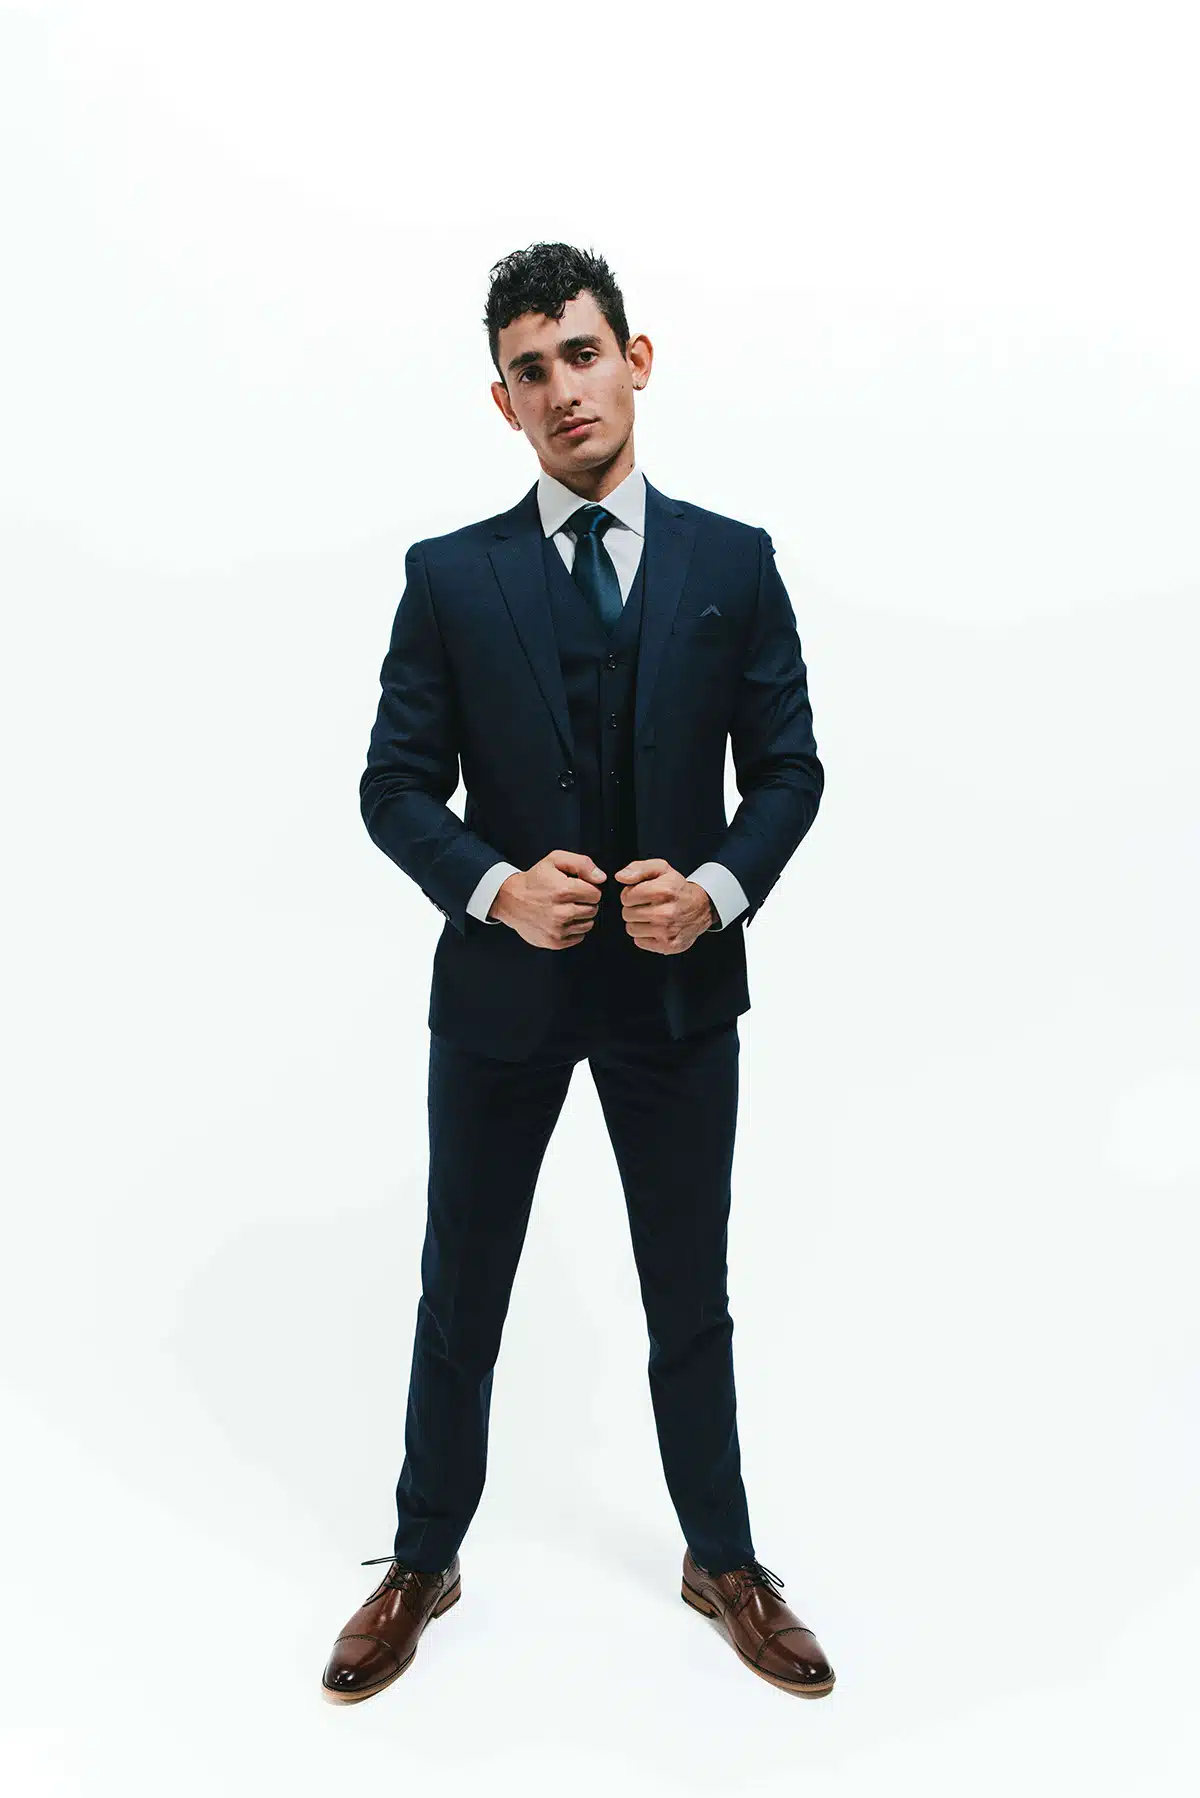 Groom wearing a Heathered Navy winter wedding suit against a white backdrop